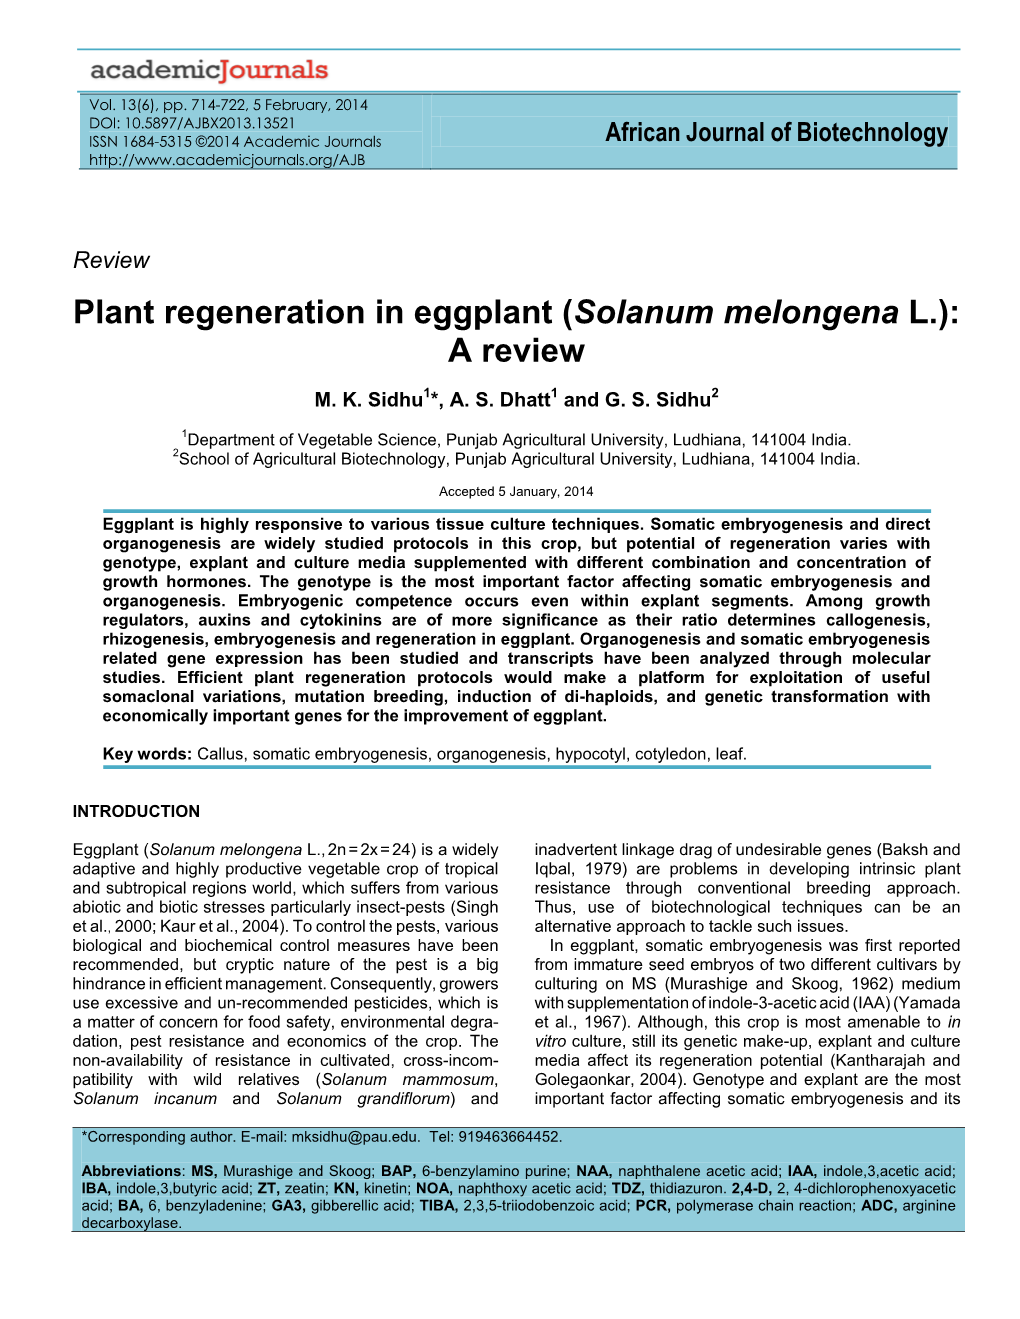 Plant Regeneration and Genetic Transformation in Eggplant